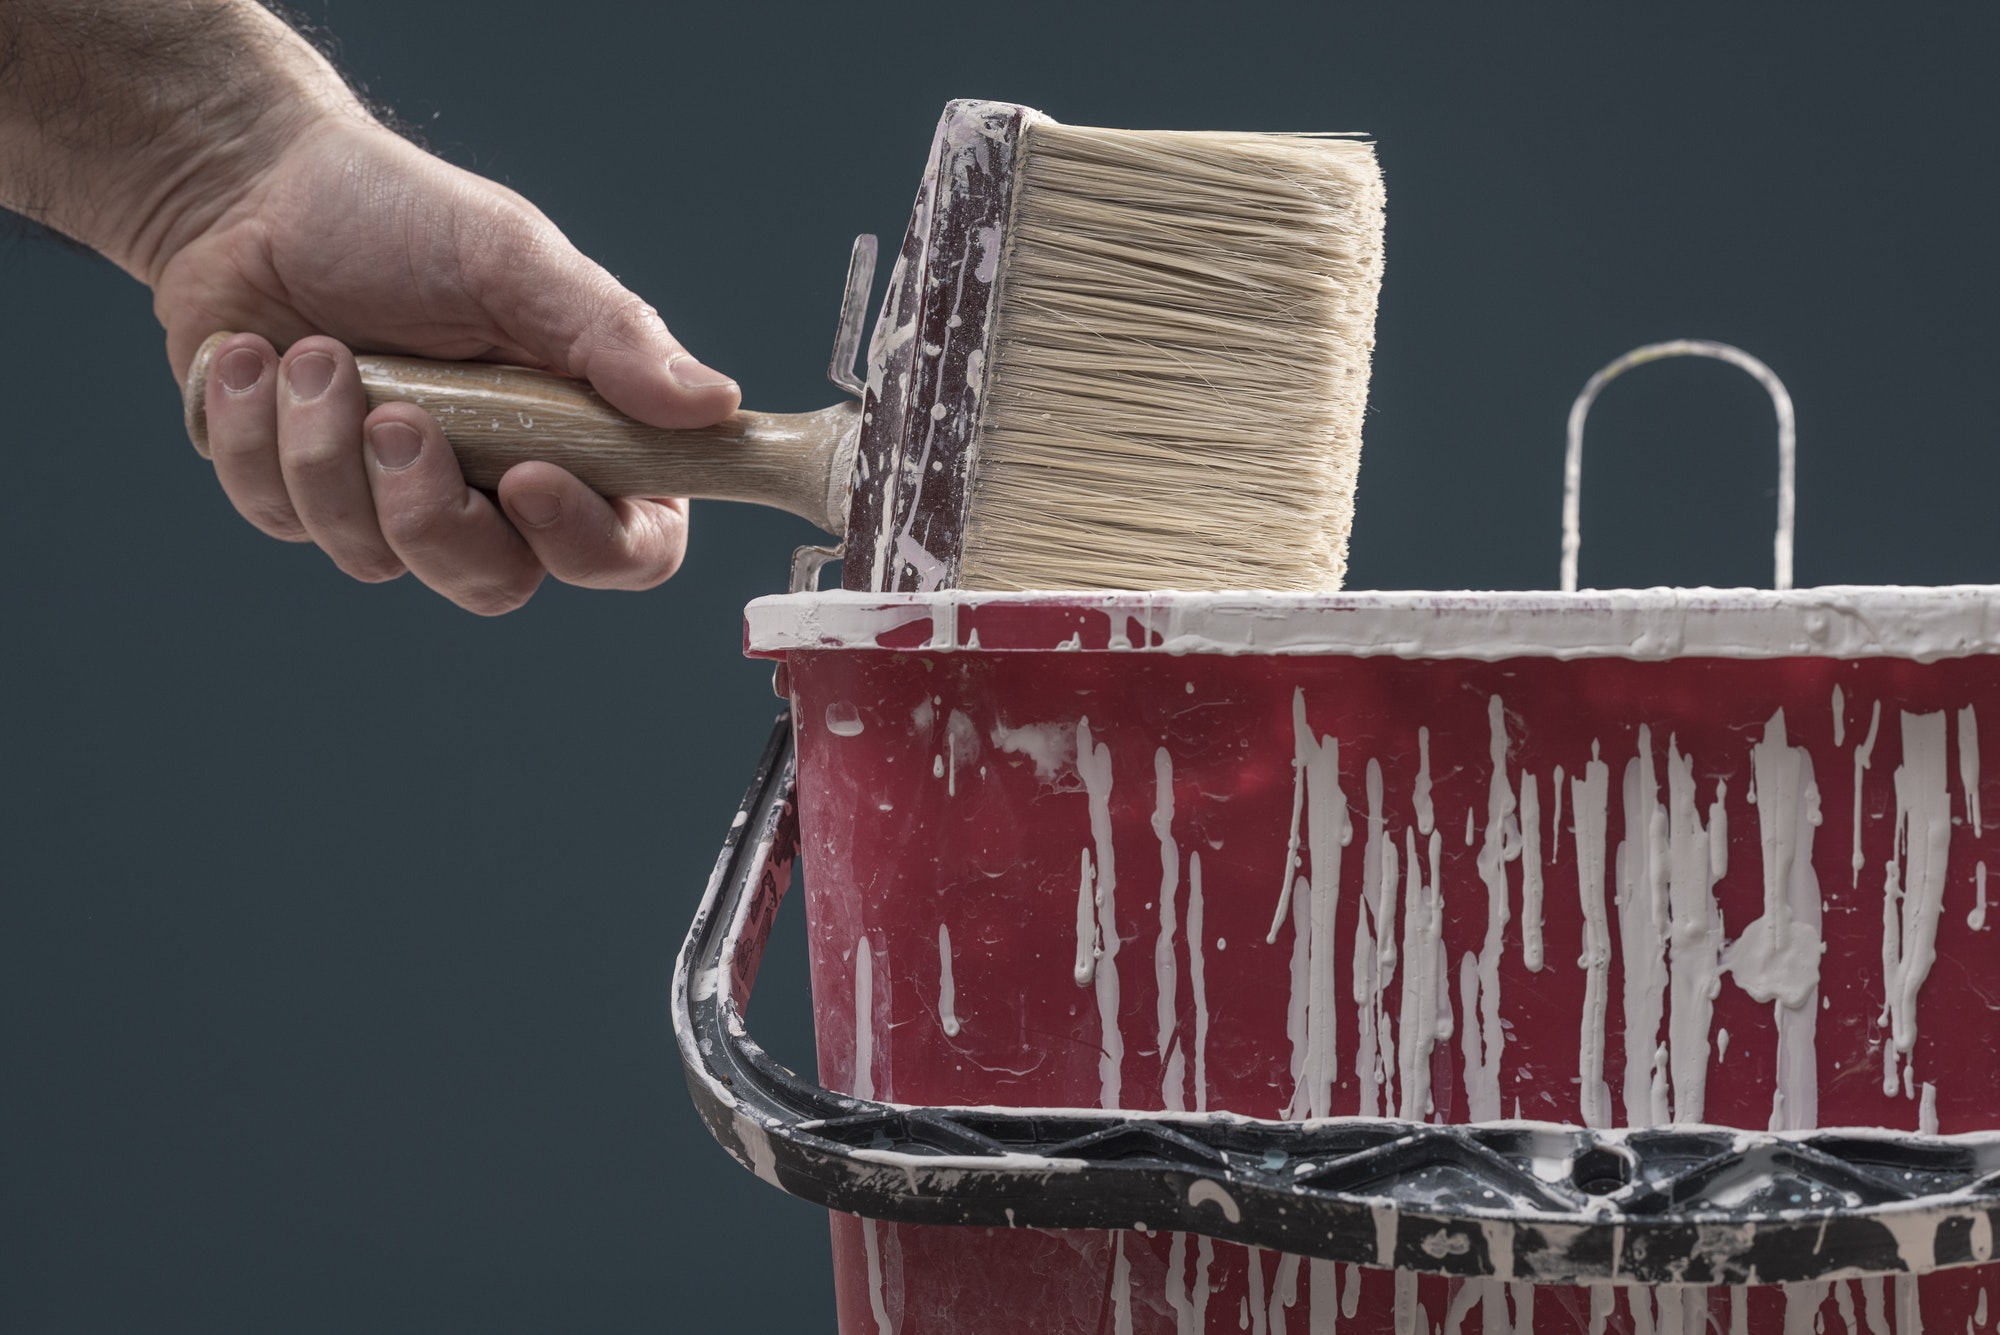 Hand Holding Paint Brush Over Red Bucket of White Paint